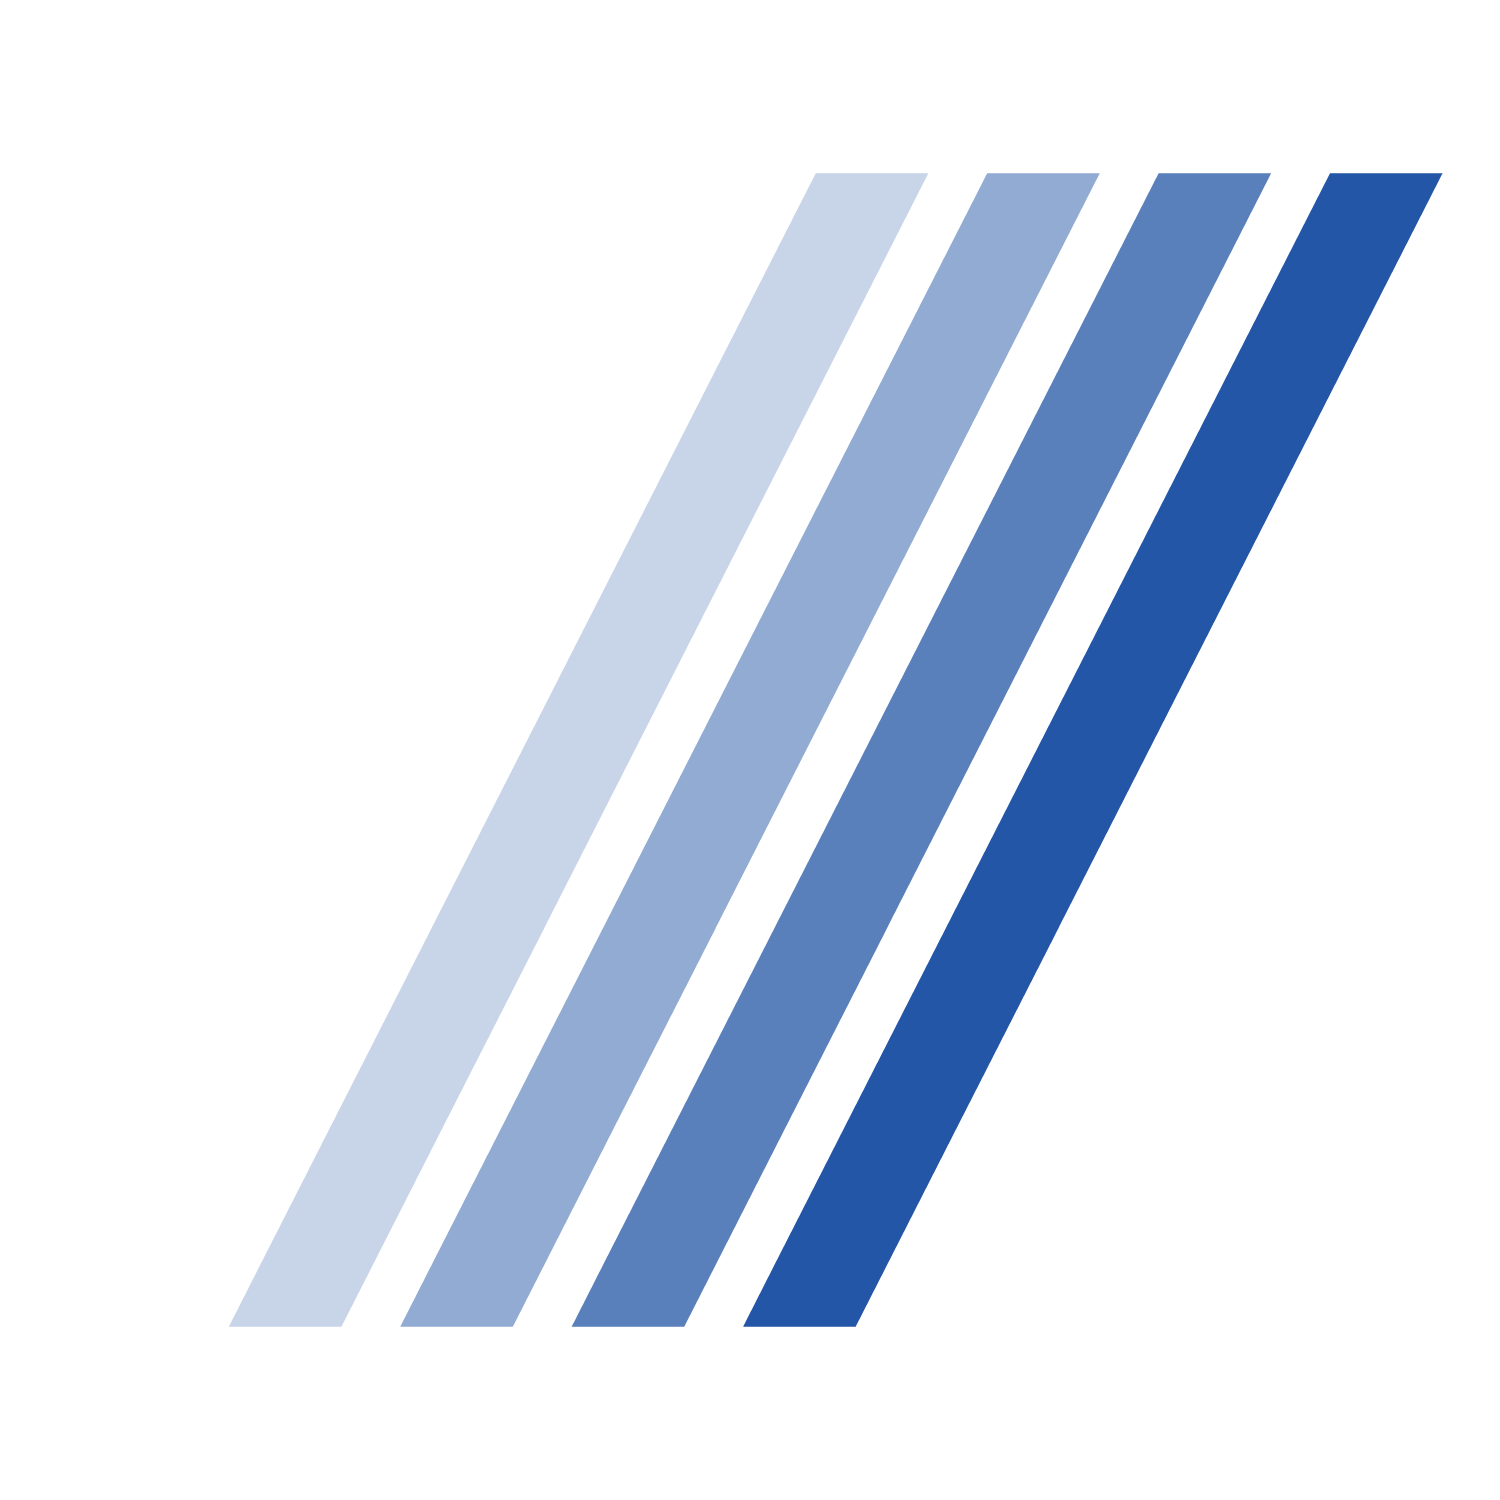 Five slanted vertical lines in gradient color from white on the left to blue on the right.